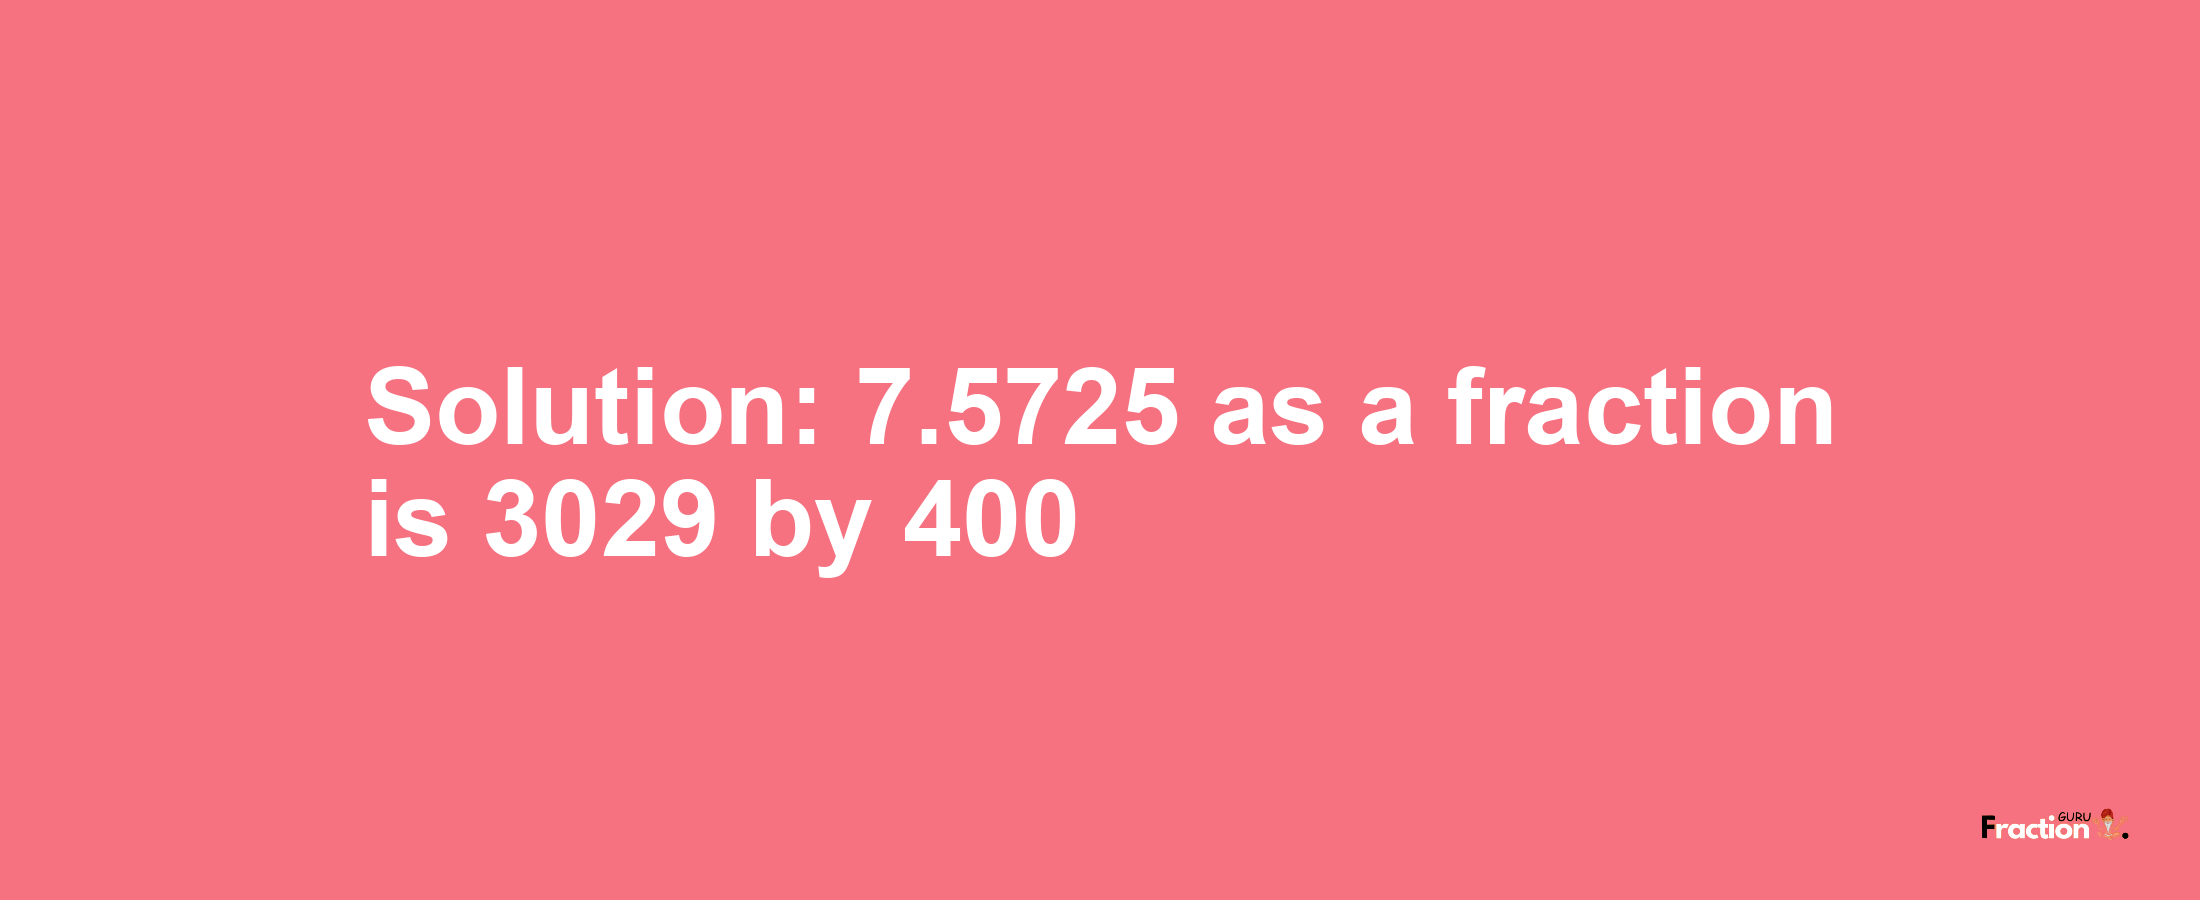 Solution:7.5725 as a fraction is 3029/400